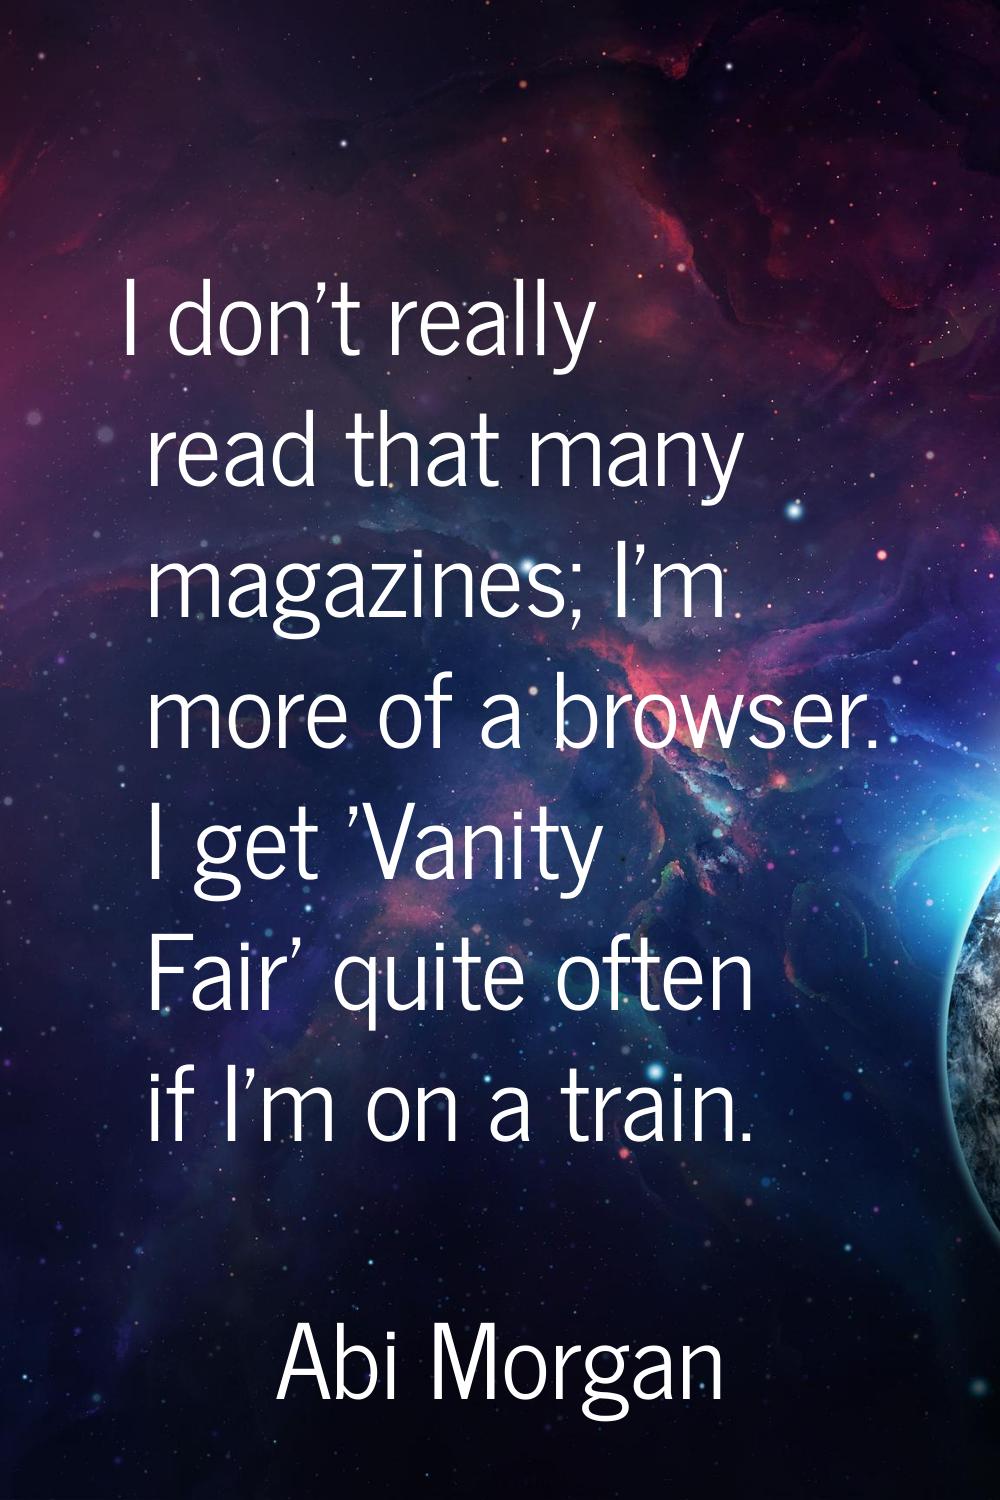 I don't really read that many magazines; I'm more of a browser. I get 'Vanity Fair' quite often if 